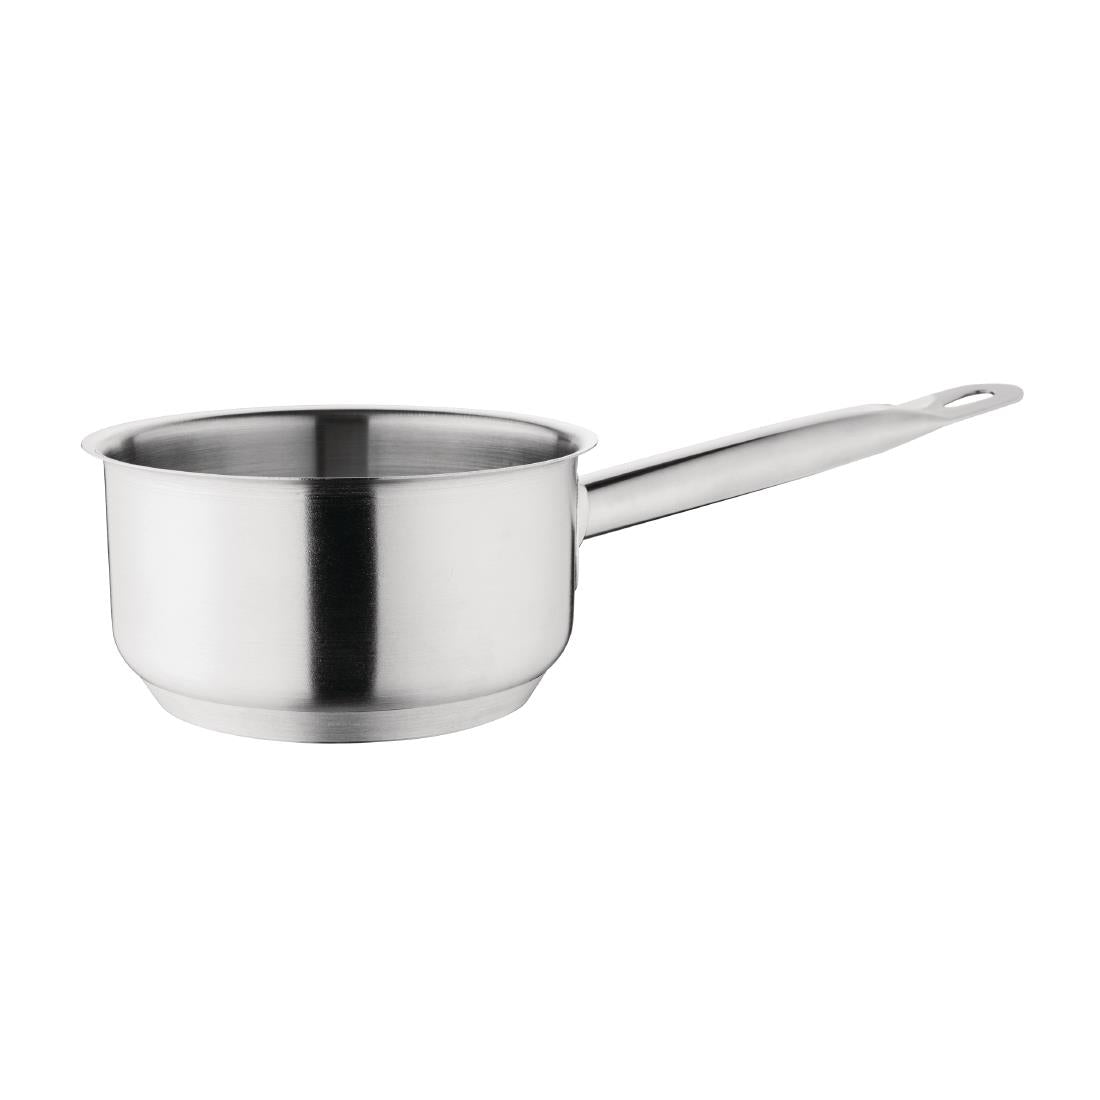 S128 Special Offer - Vogue Saucepan Set (Pack of 3)